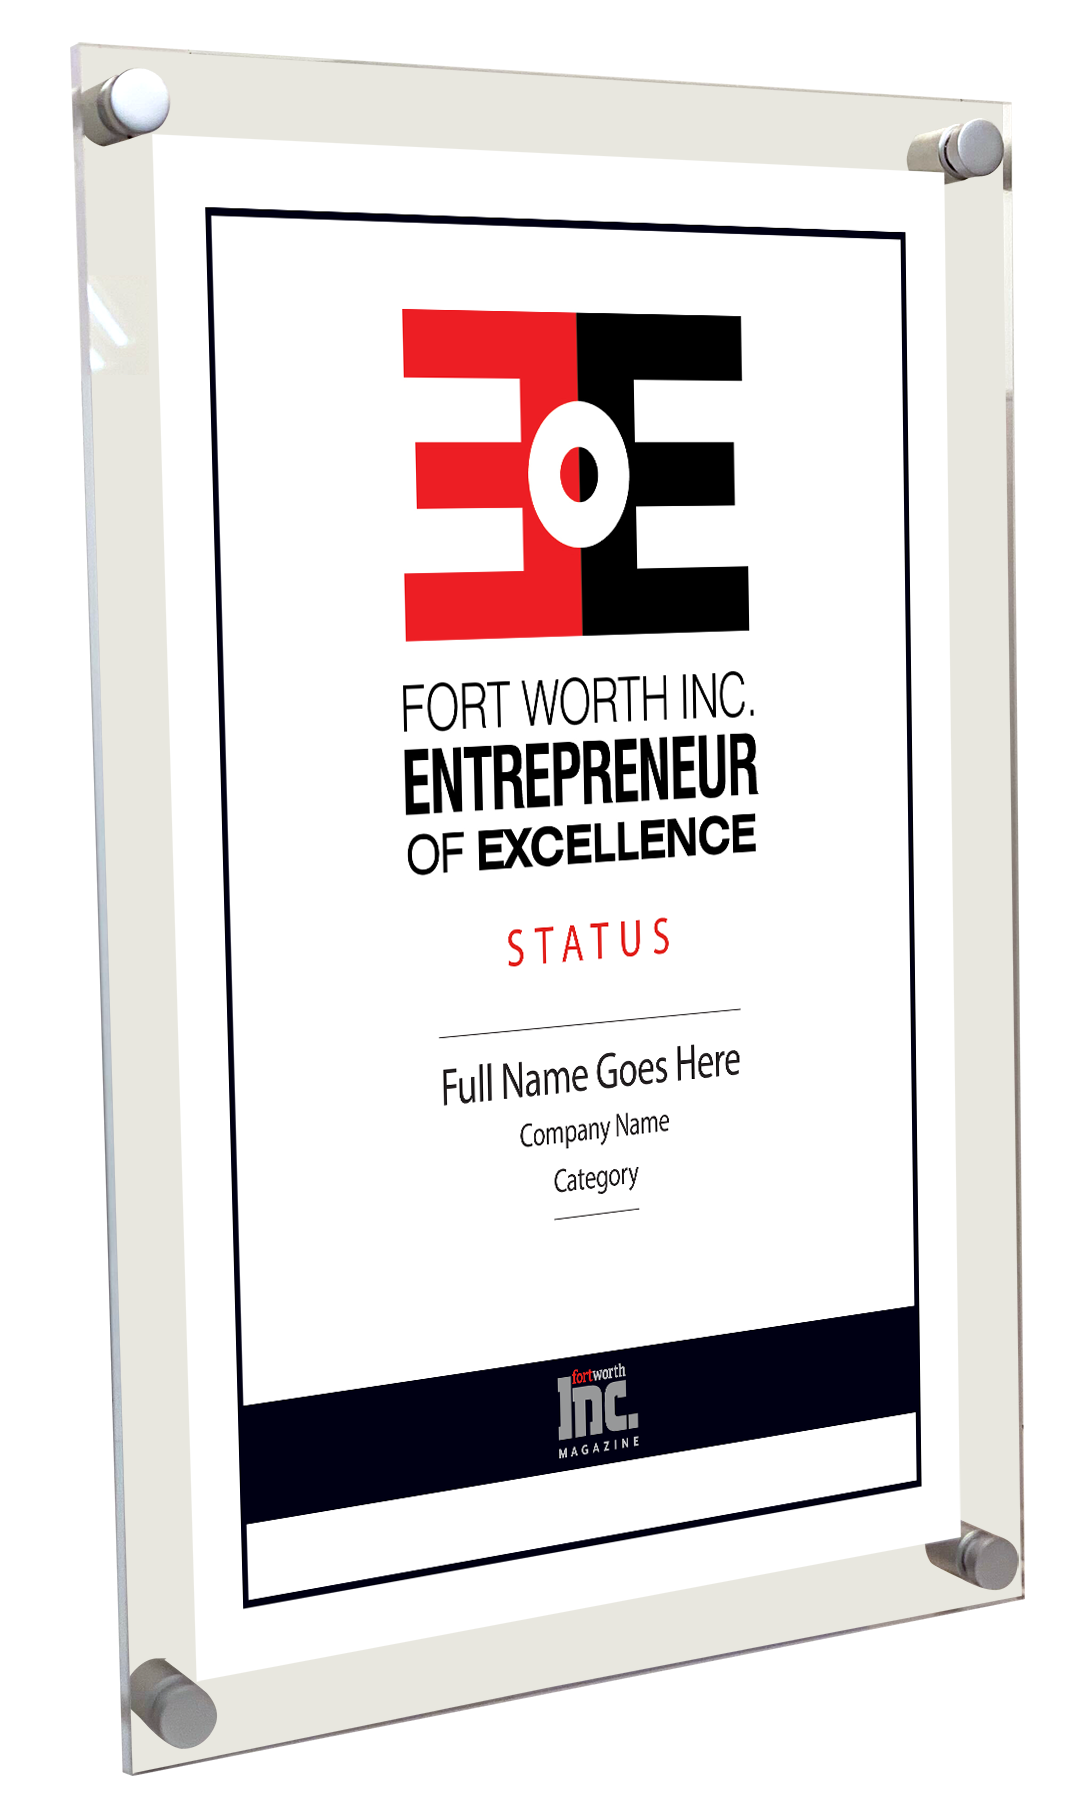 Fort Worth Inc. Entrepreneurs of Excellence Award Acrylic Plaque